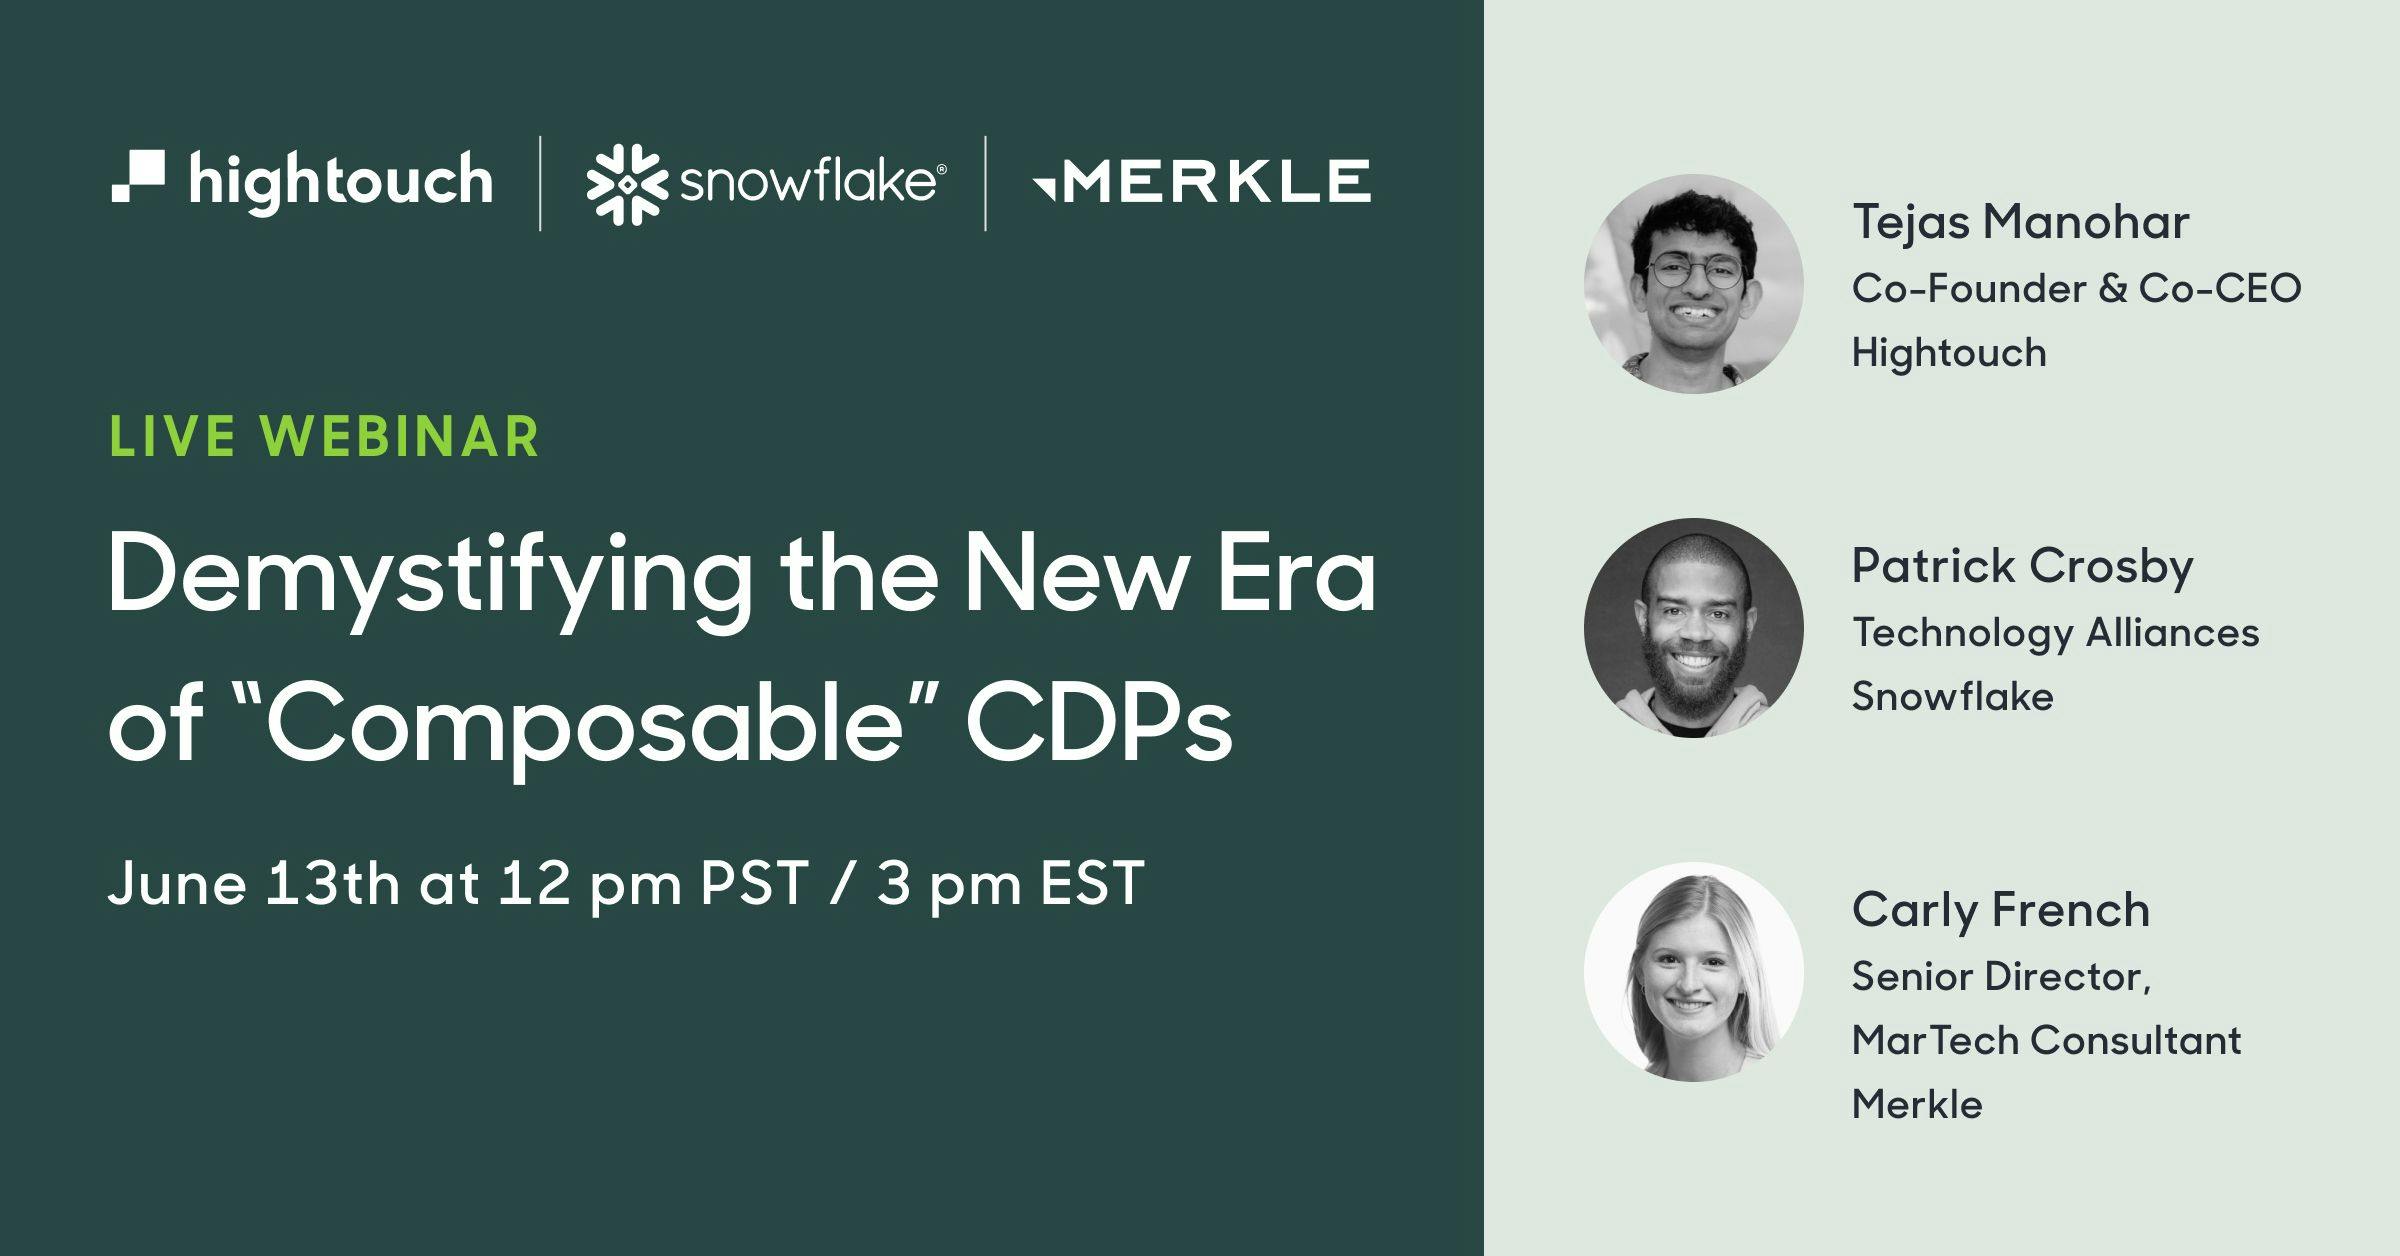 Demystifying the New Era of “Composable” CDPs